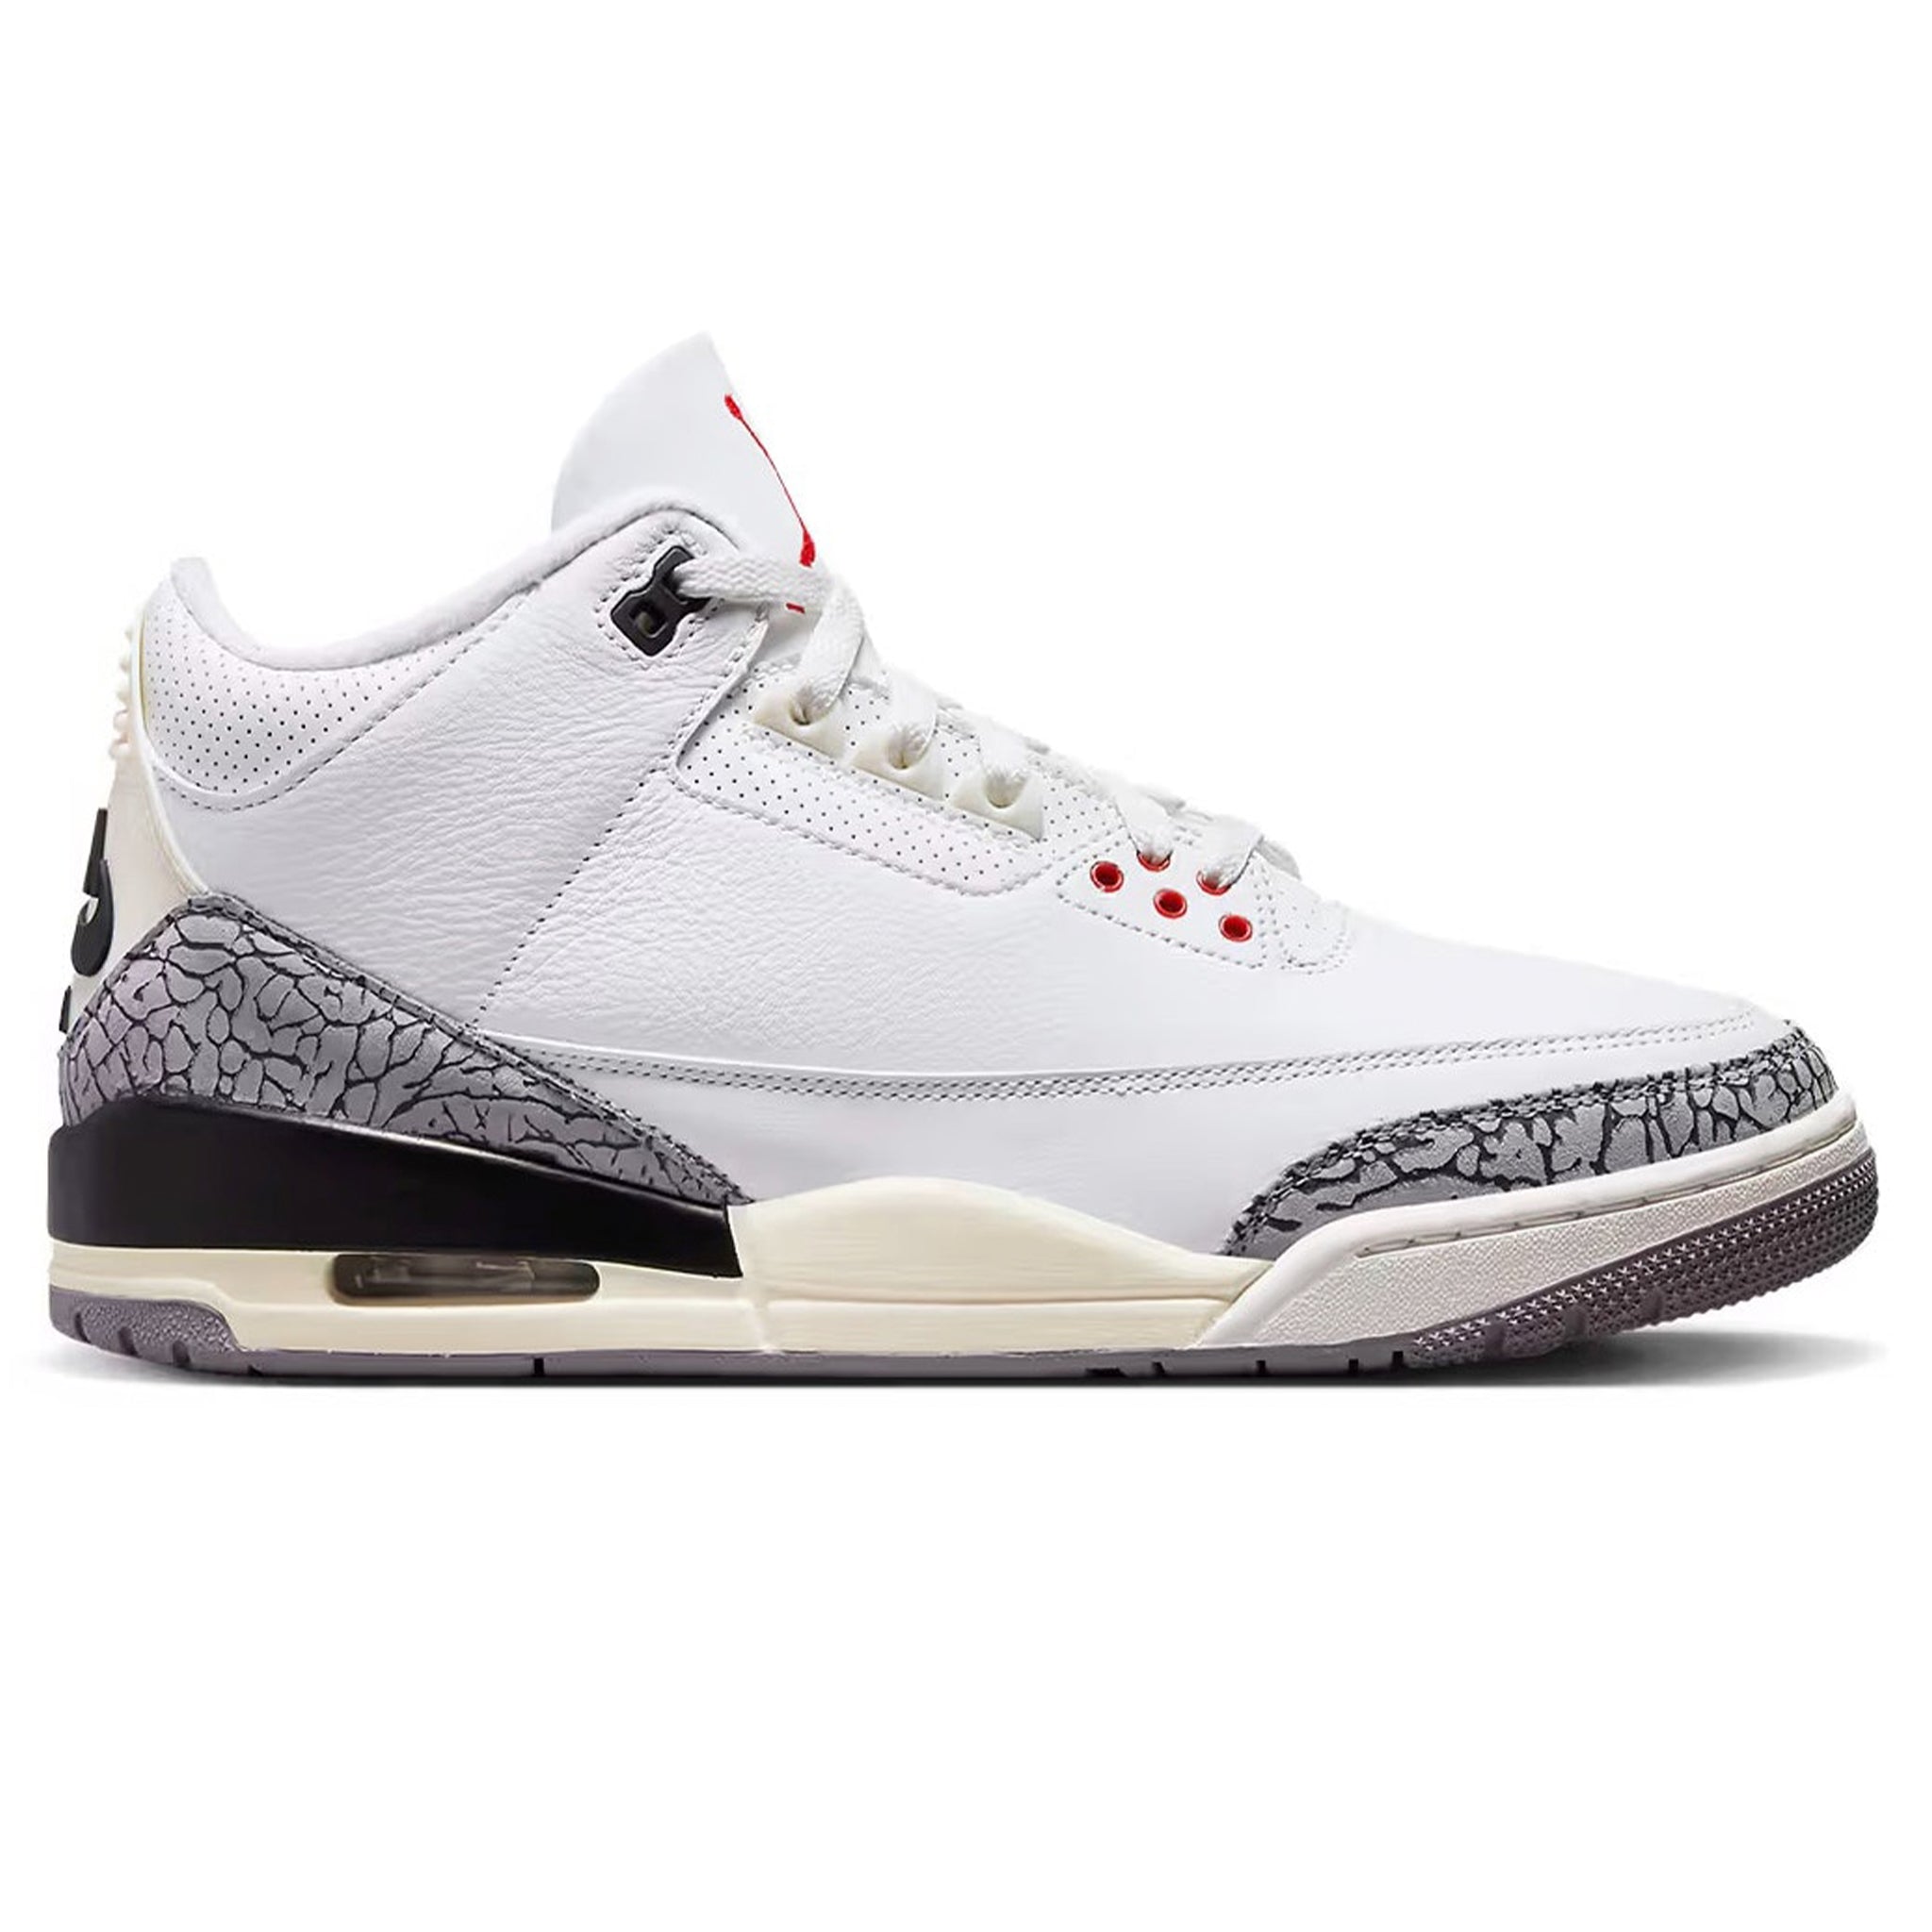 How Nike Is Releasing the Air Jordan 3 'White Cement Reimagined' on SNKRS